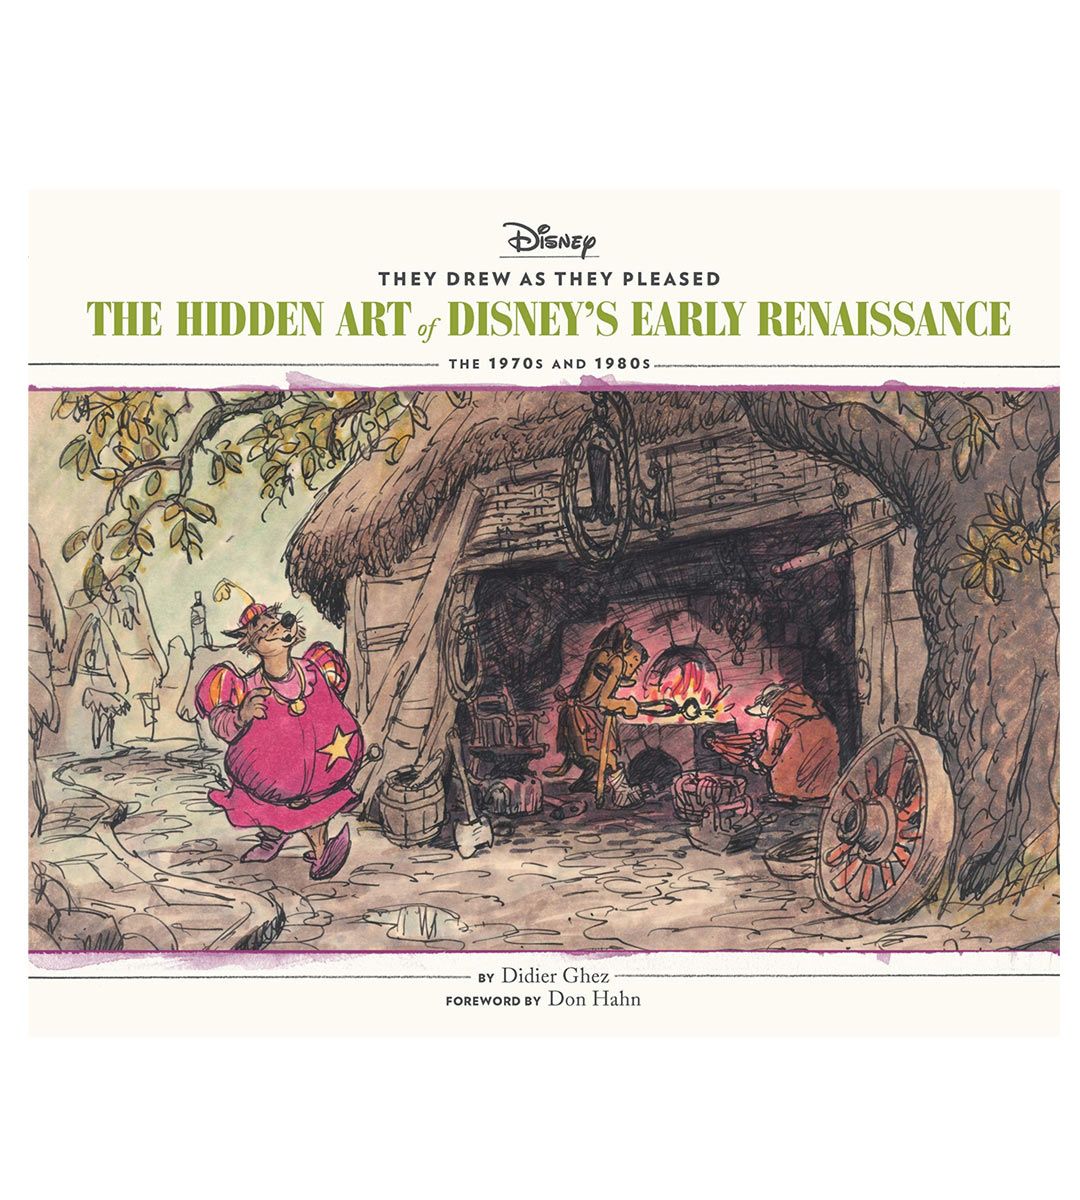 The Hidden Art of Disney's Early Renaissance - The 1970s and the 1980s